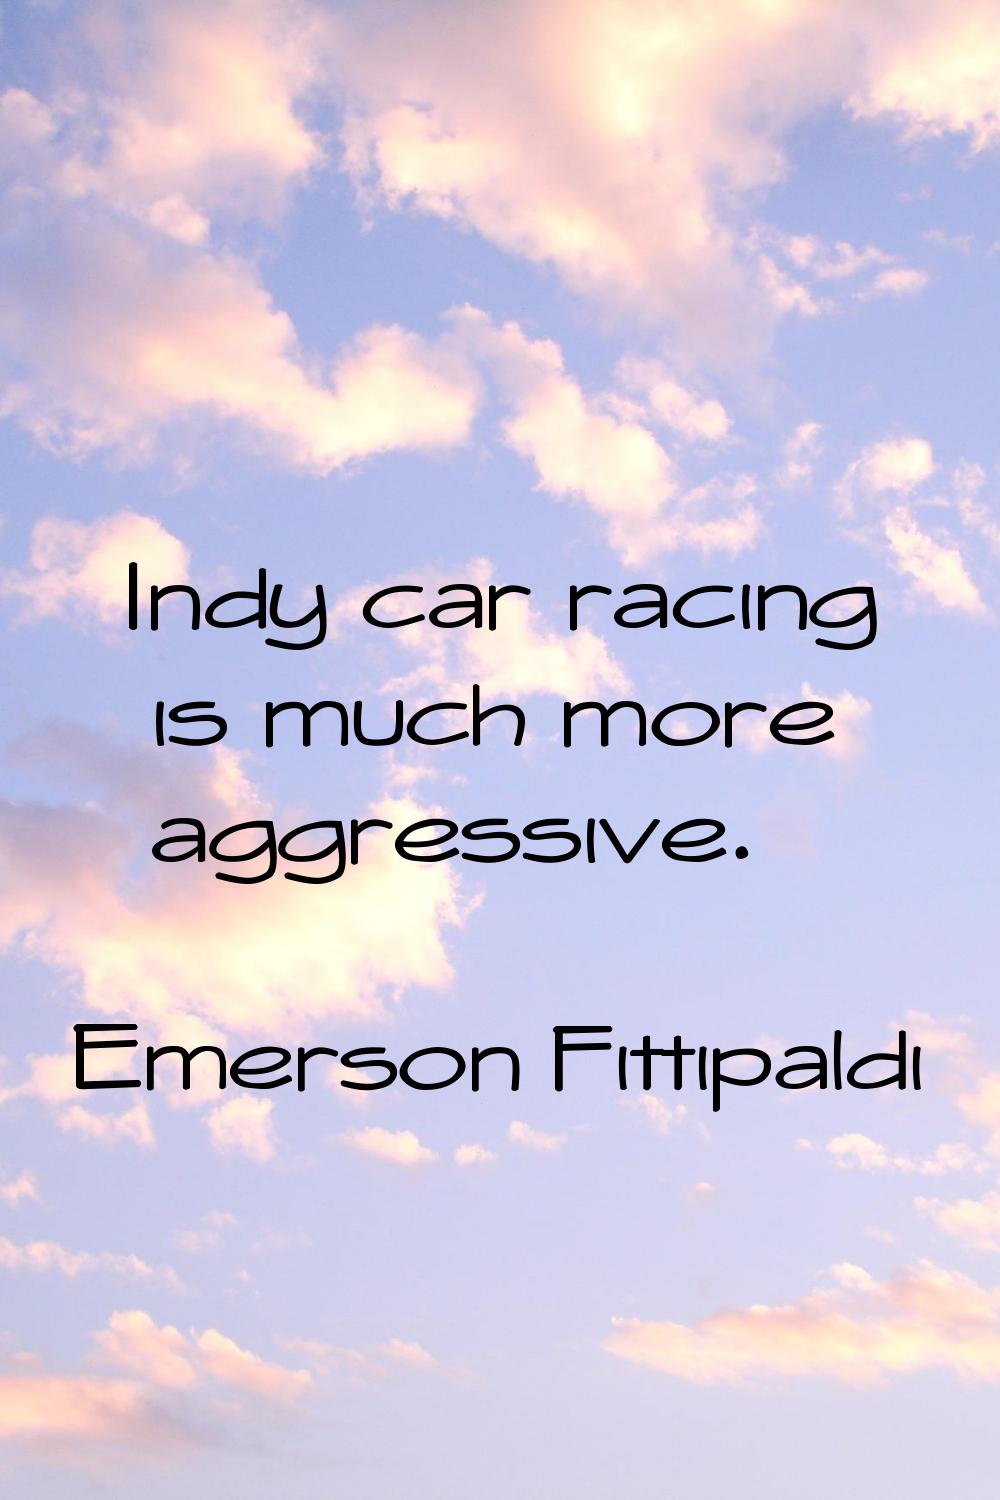 Indy car racing is much more aggressive.